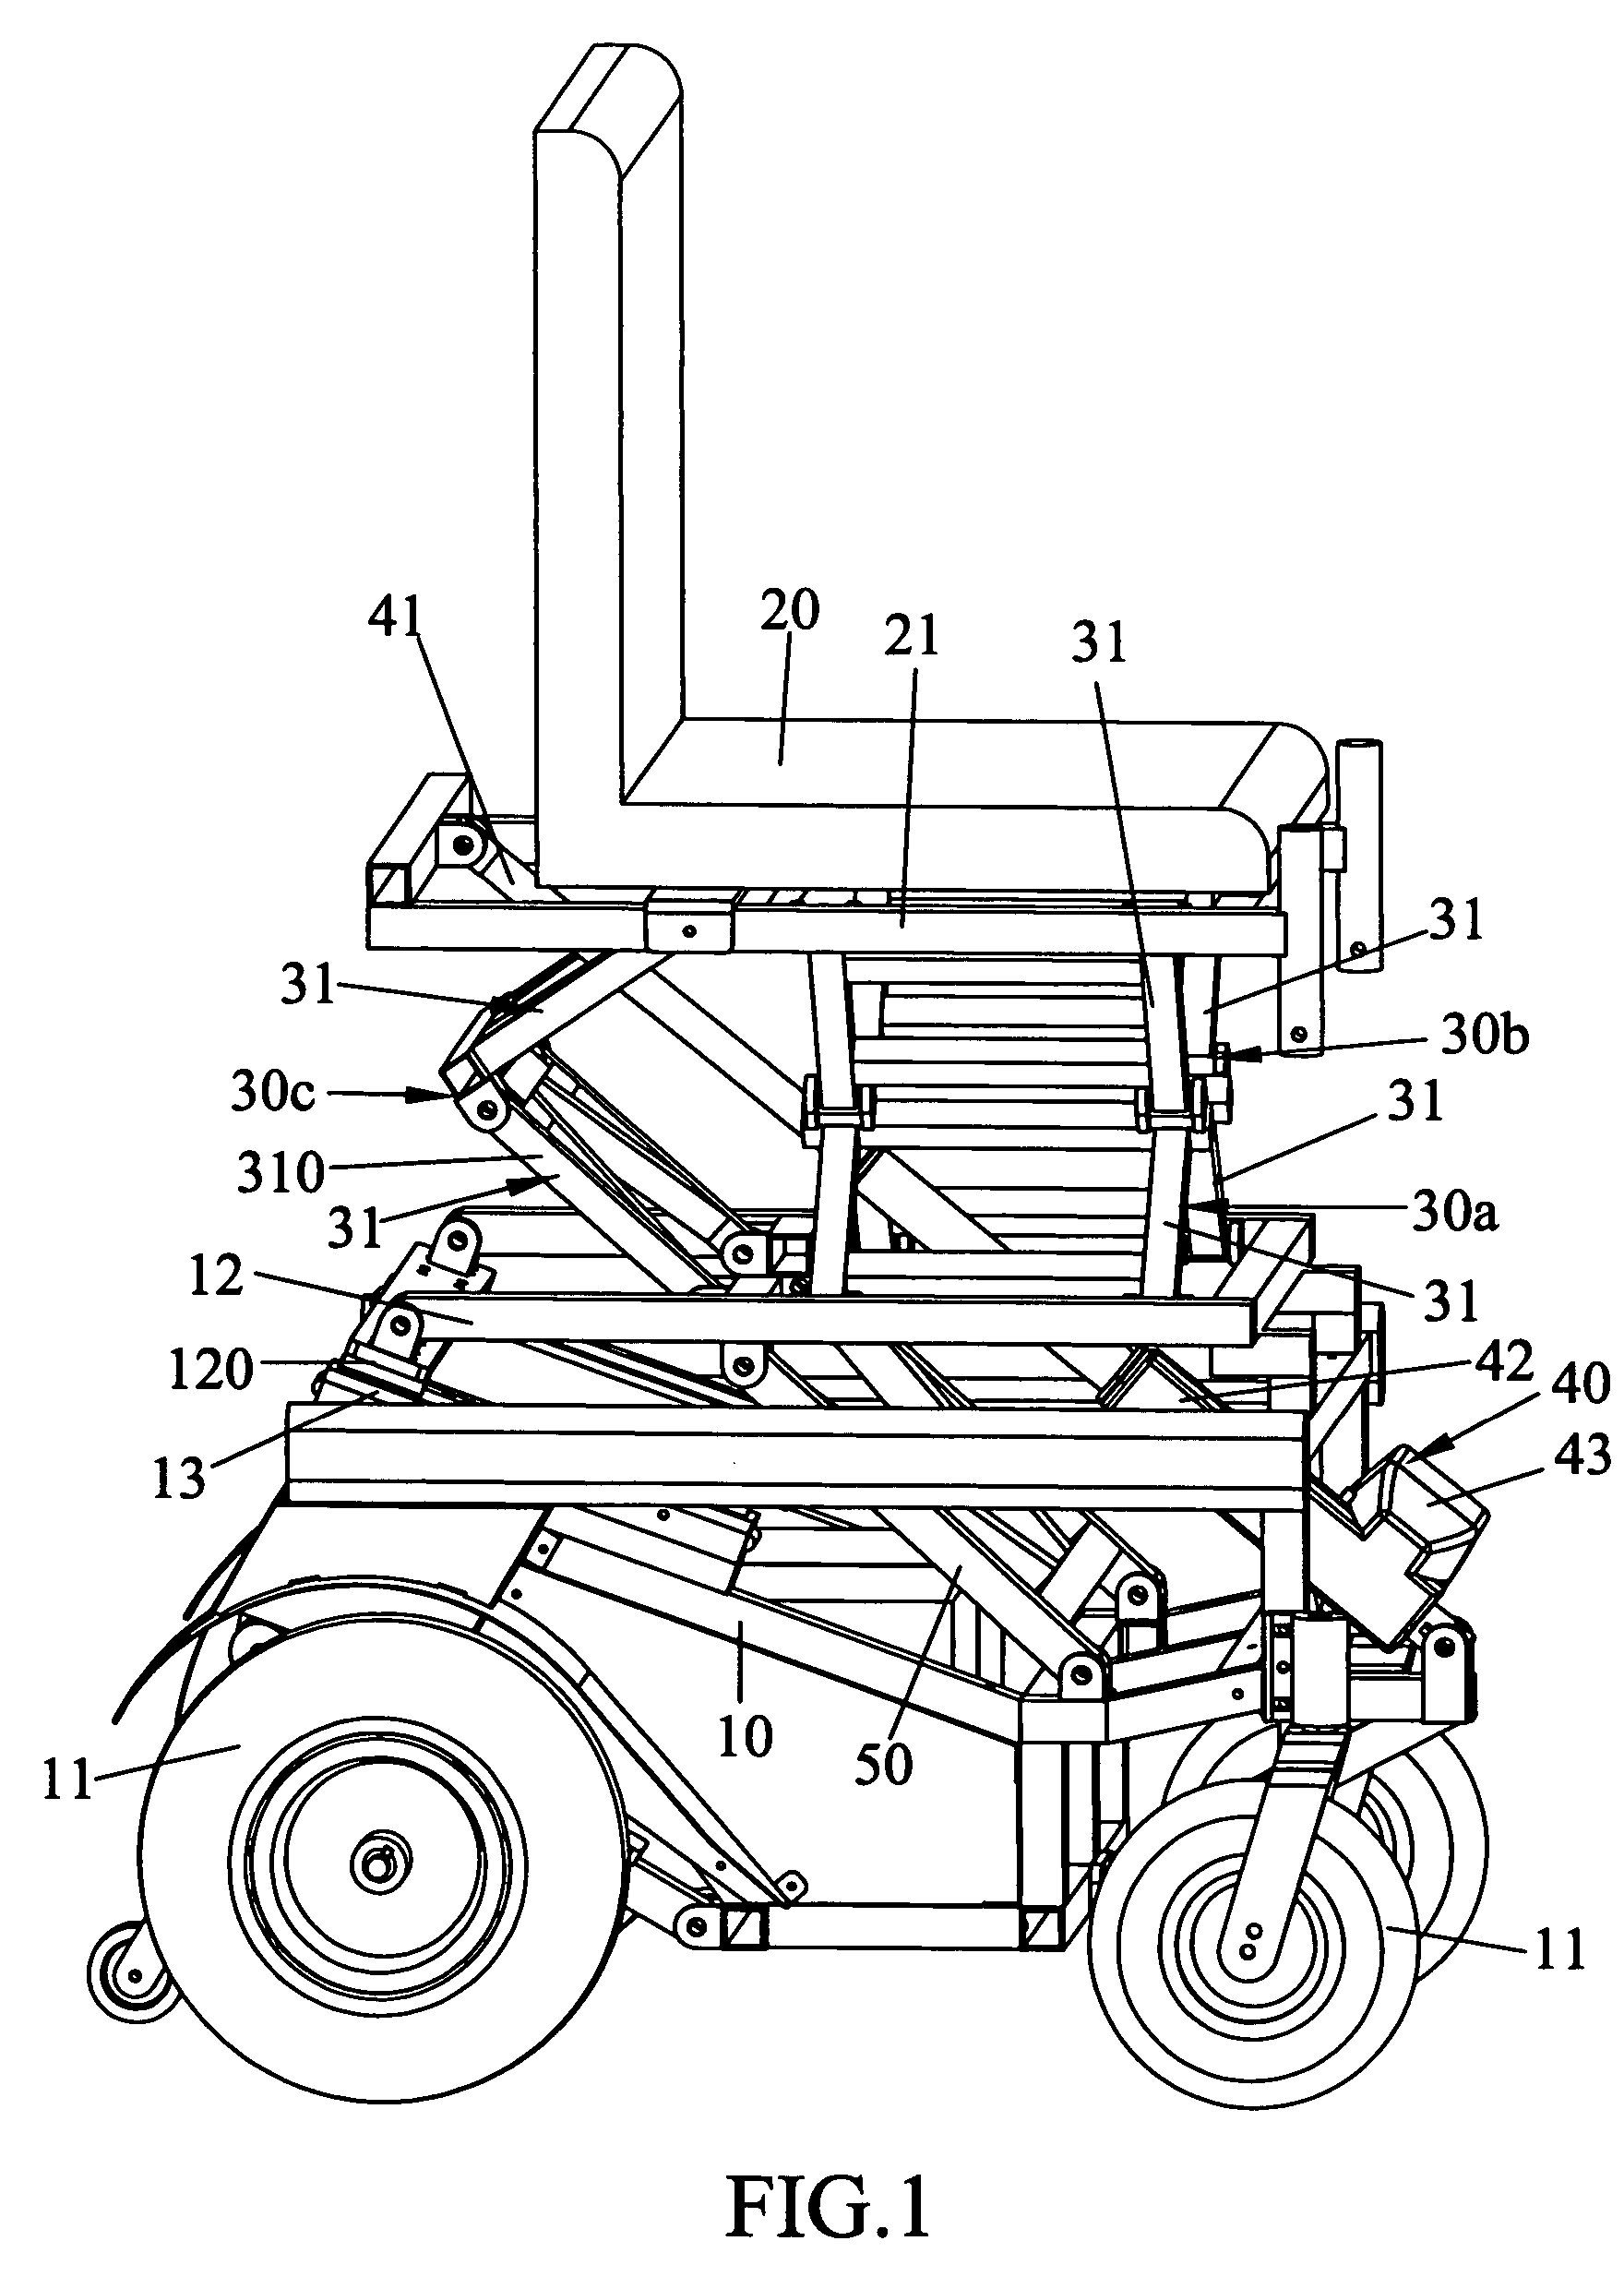 Seat adjusting mechanism of a motorized wheelchair